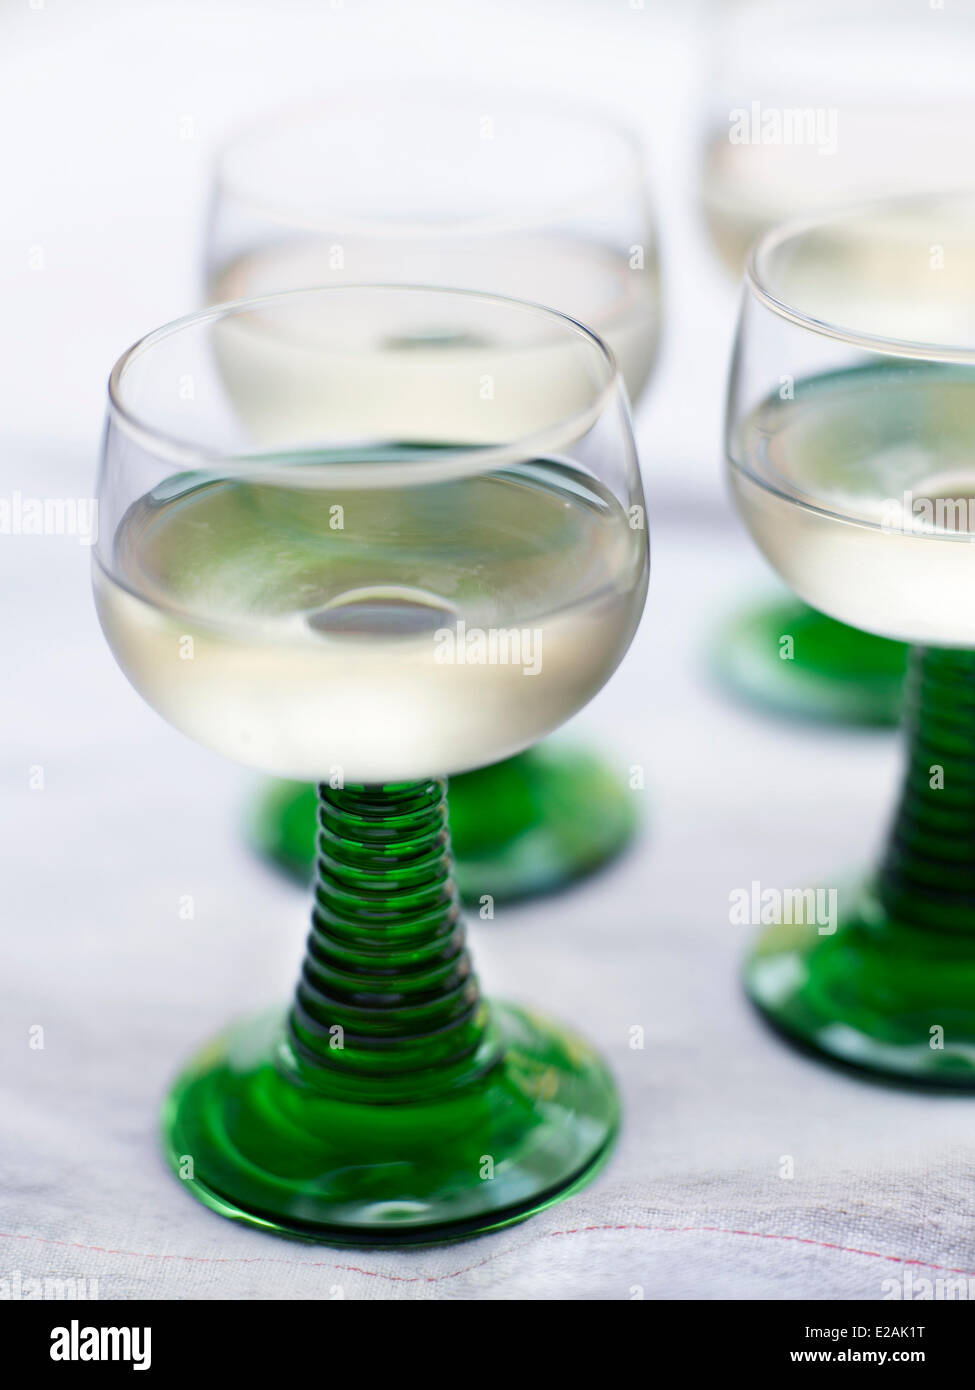 France, Alsace, feature : Felder's Alsace, glasses of white wine from Alsace  Stock Photo - Alamy